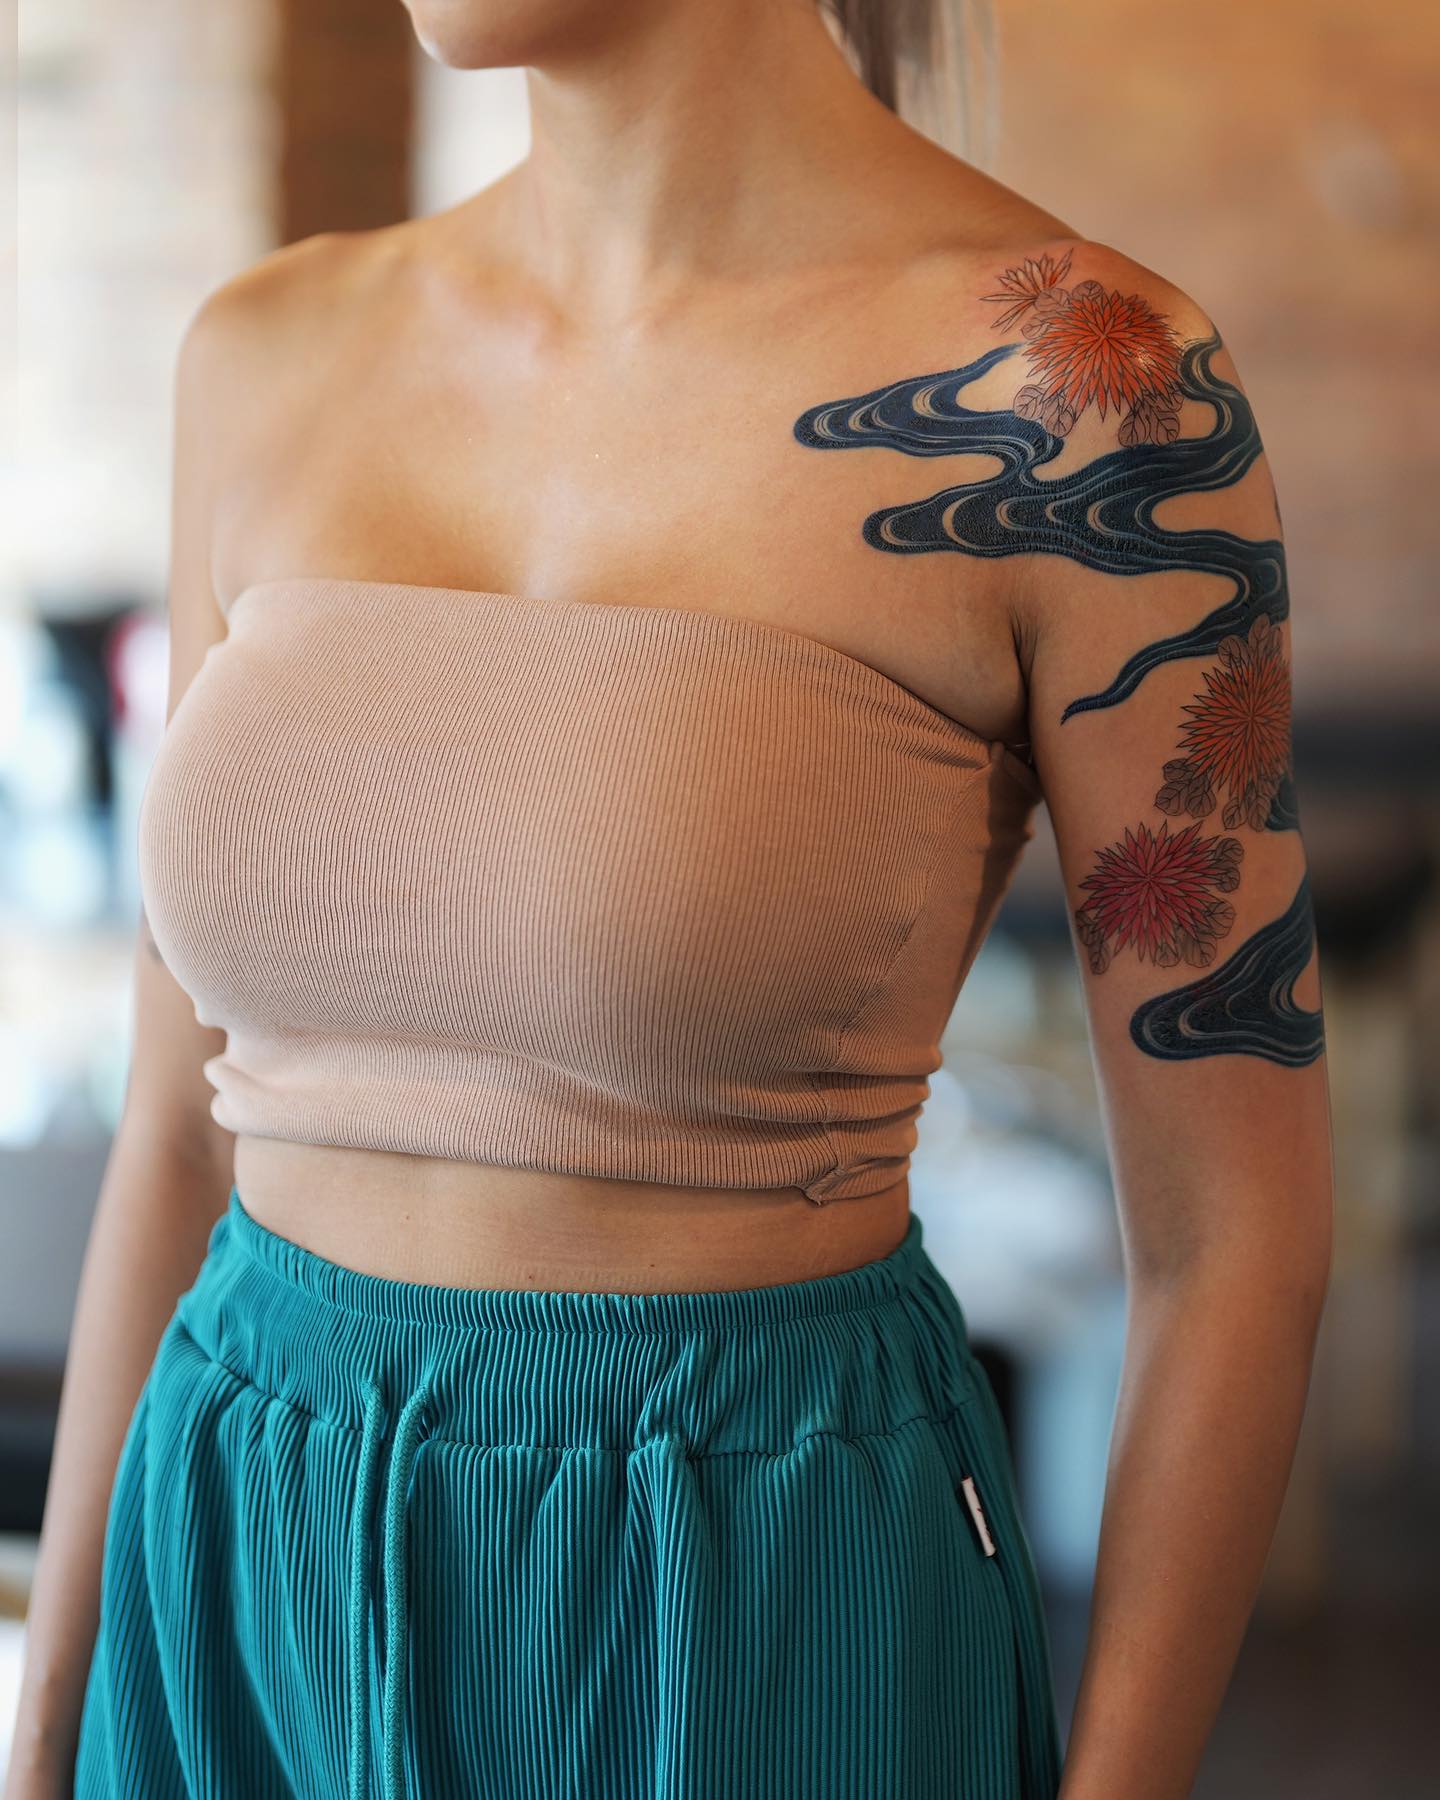 Artistic Floral and Wave Sleeve Tattoo on Arm